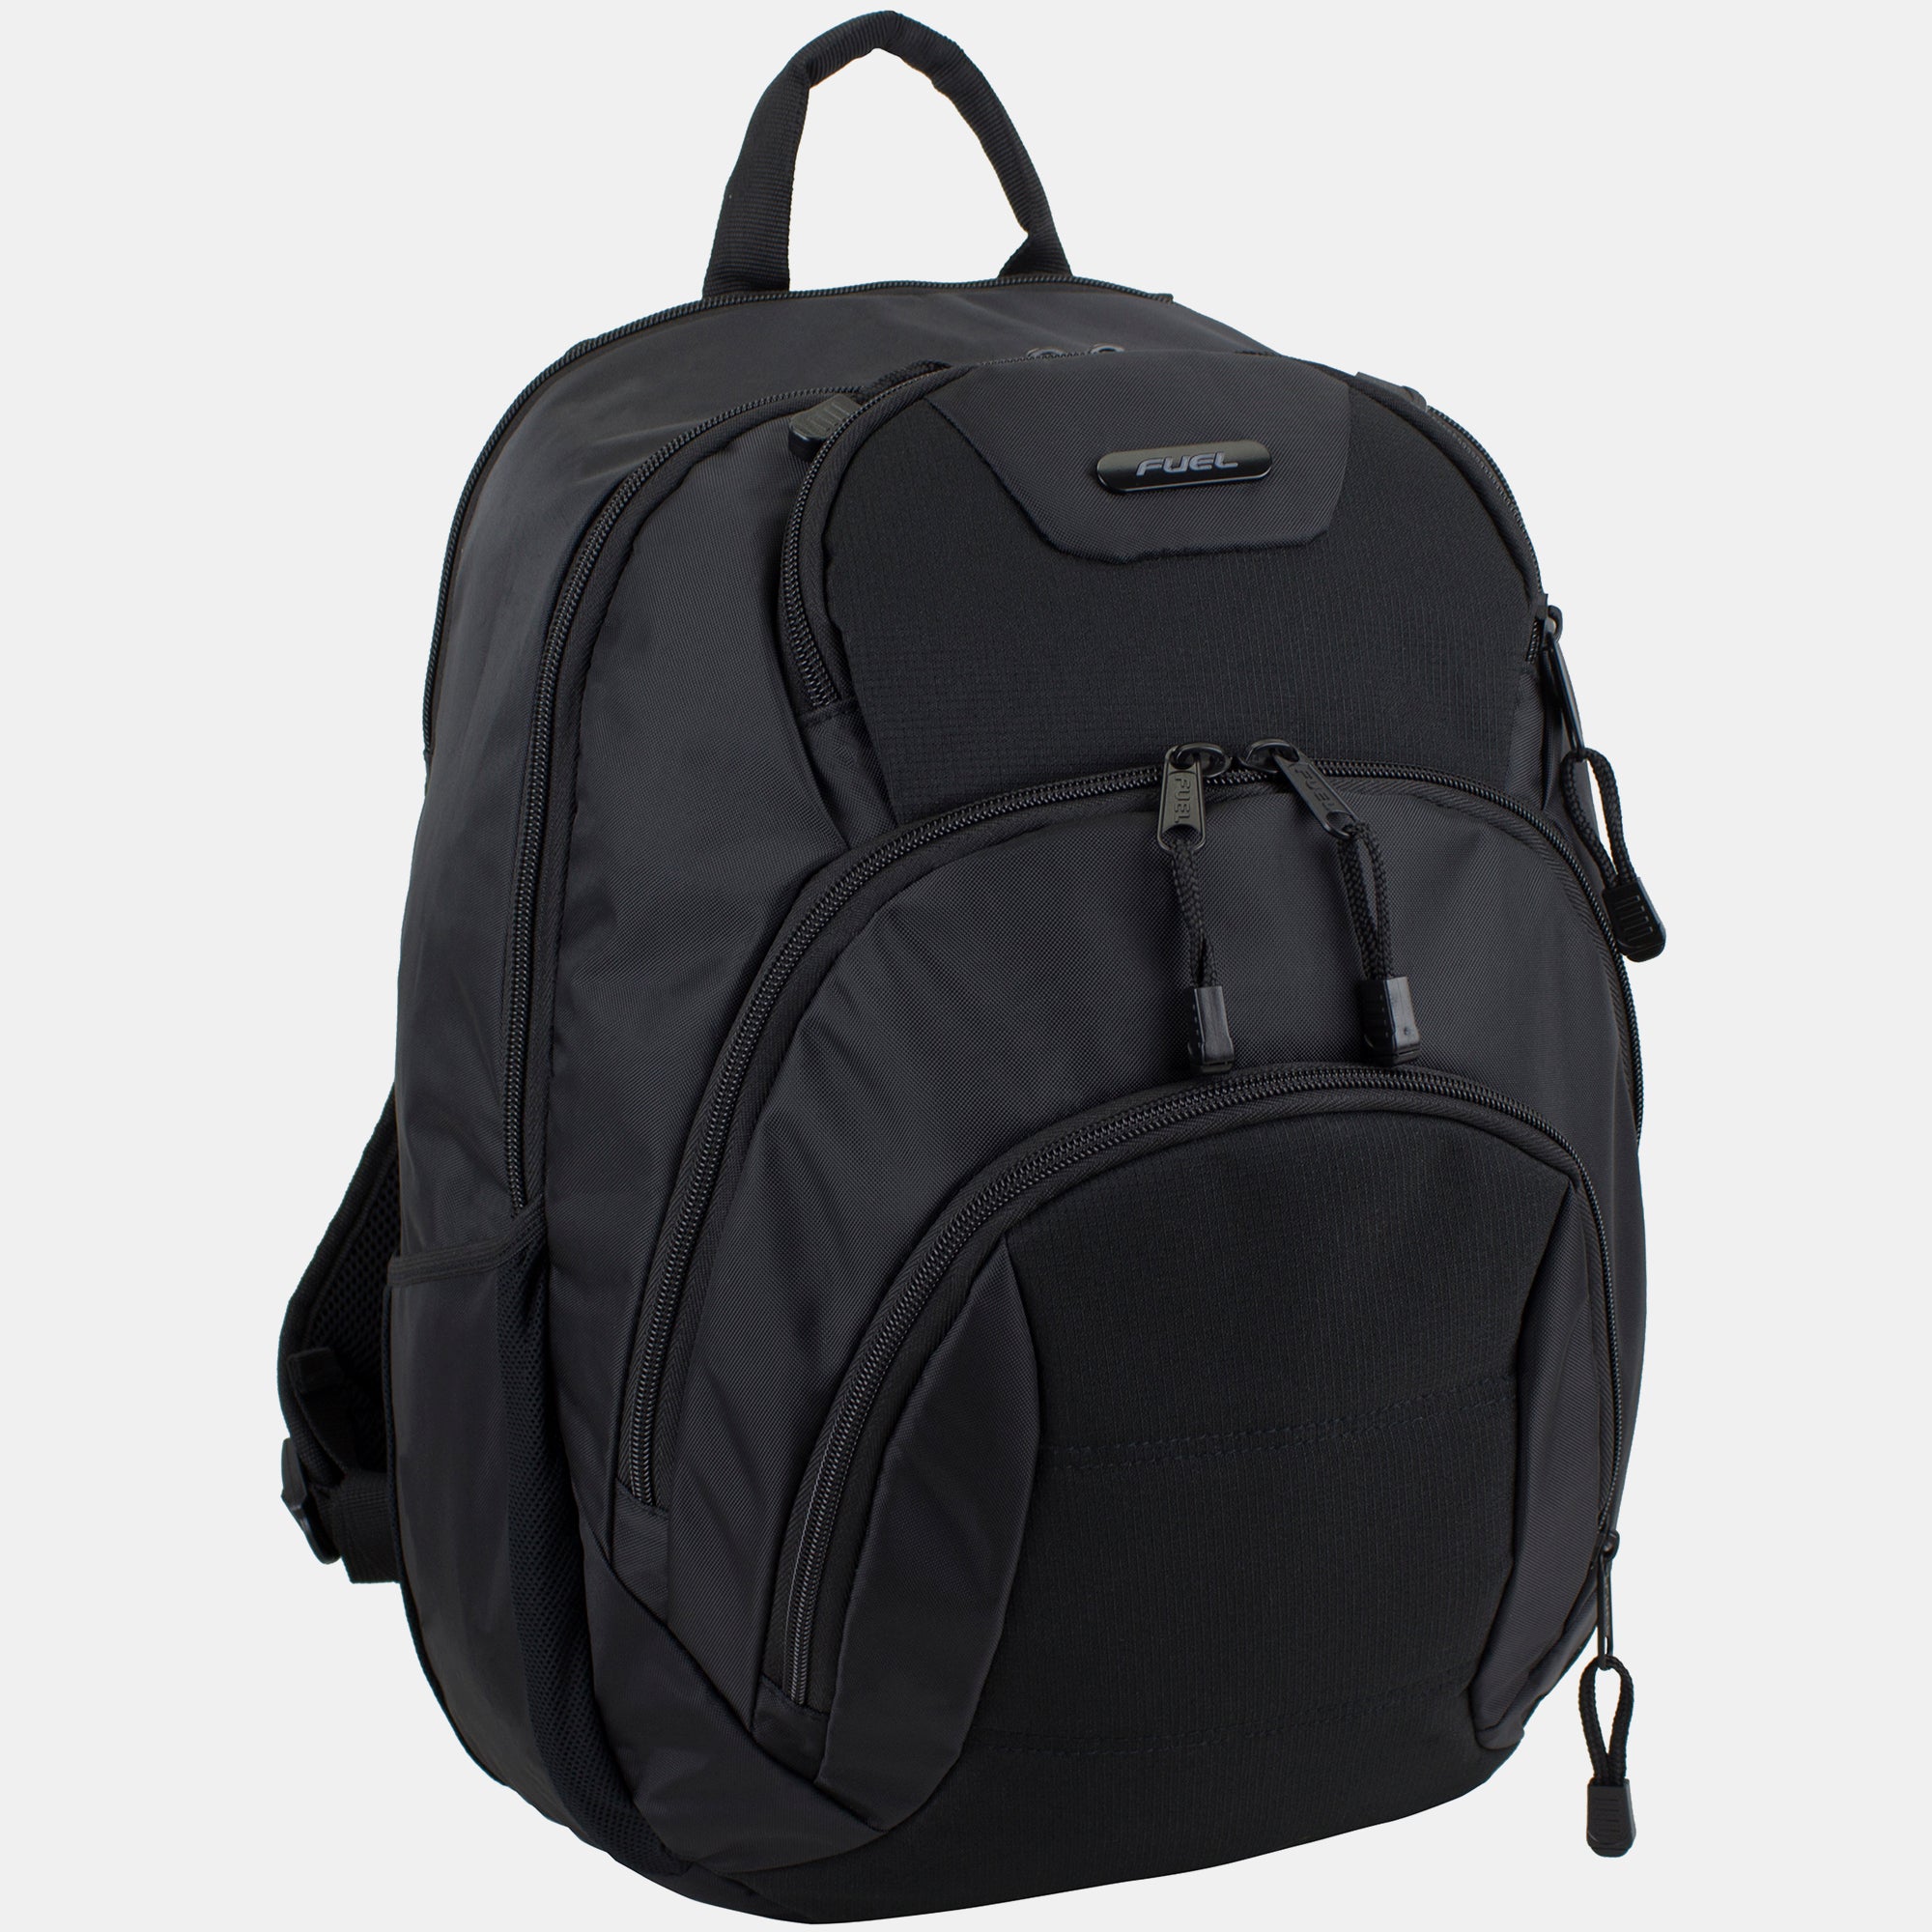 Fuel Tech Backpack With Sporty Edge for School, College, Commute or Travel